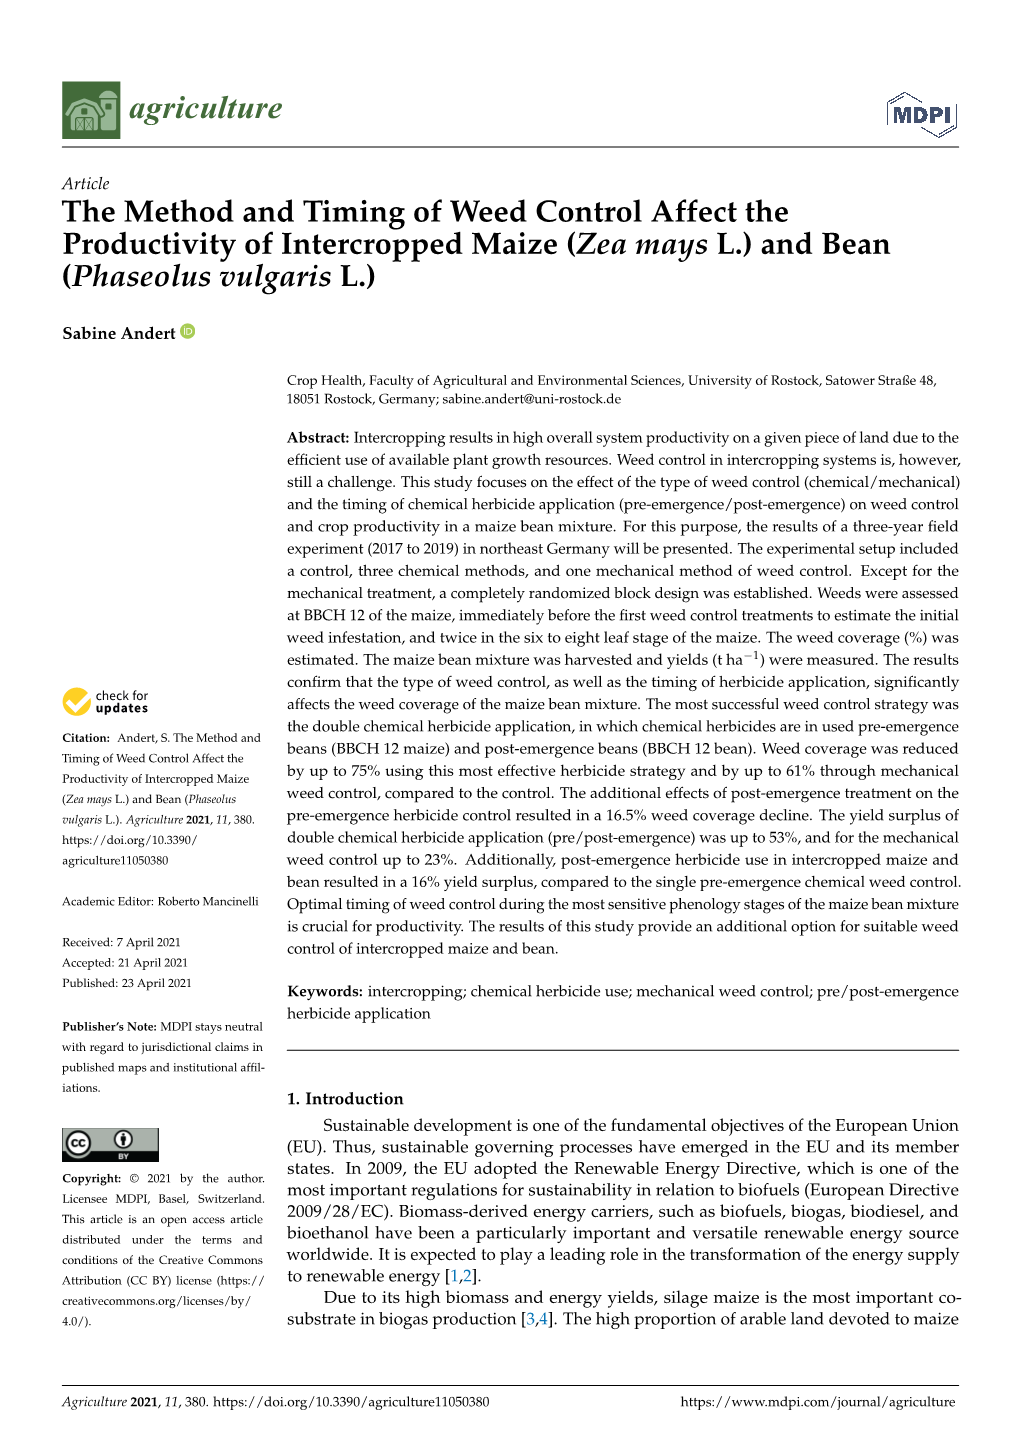 The Method and Timing of Weed Control Affect the Productivity of Intercropped Maize (Zea Mays L.) and Bean (Phaseolus Vulgaris L.)